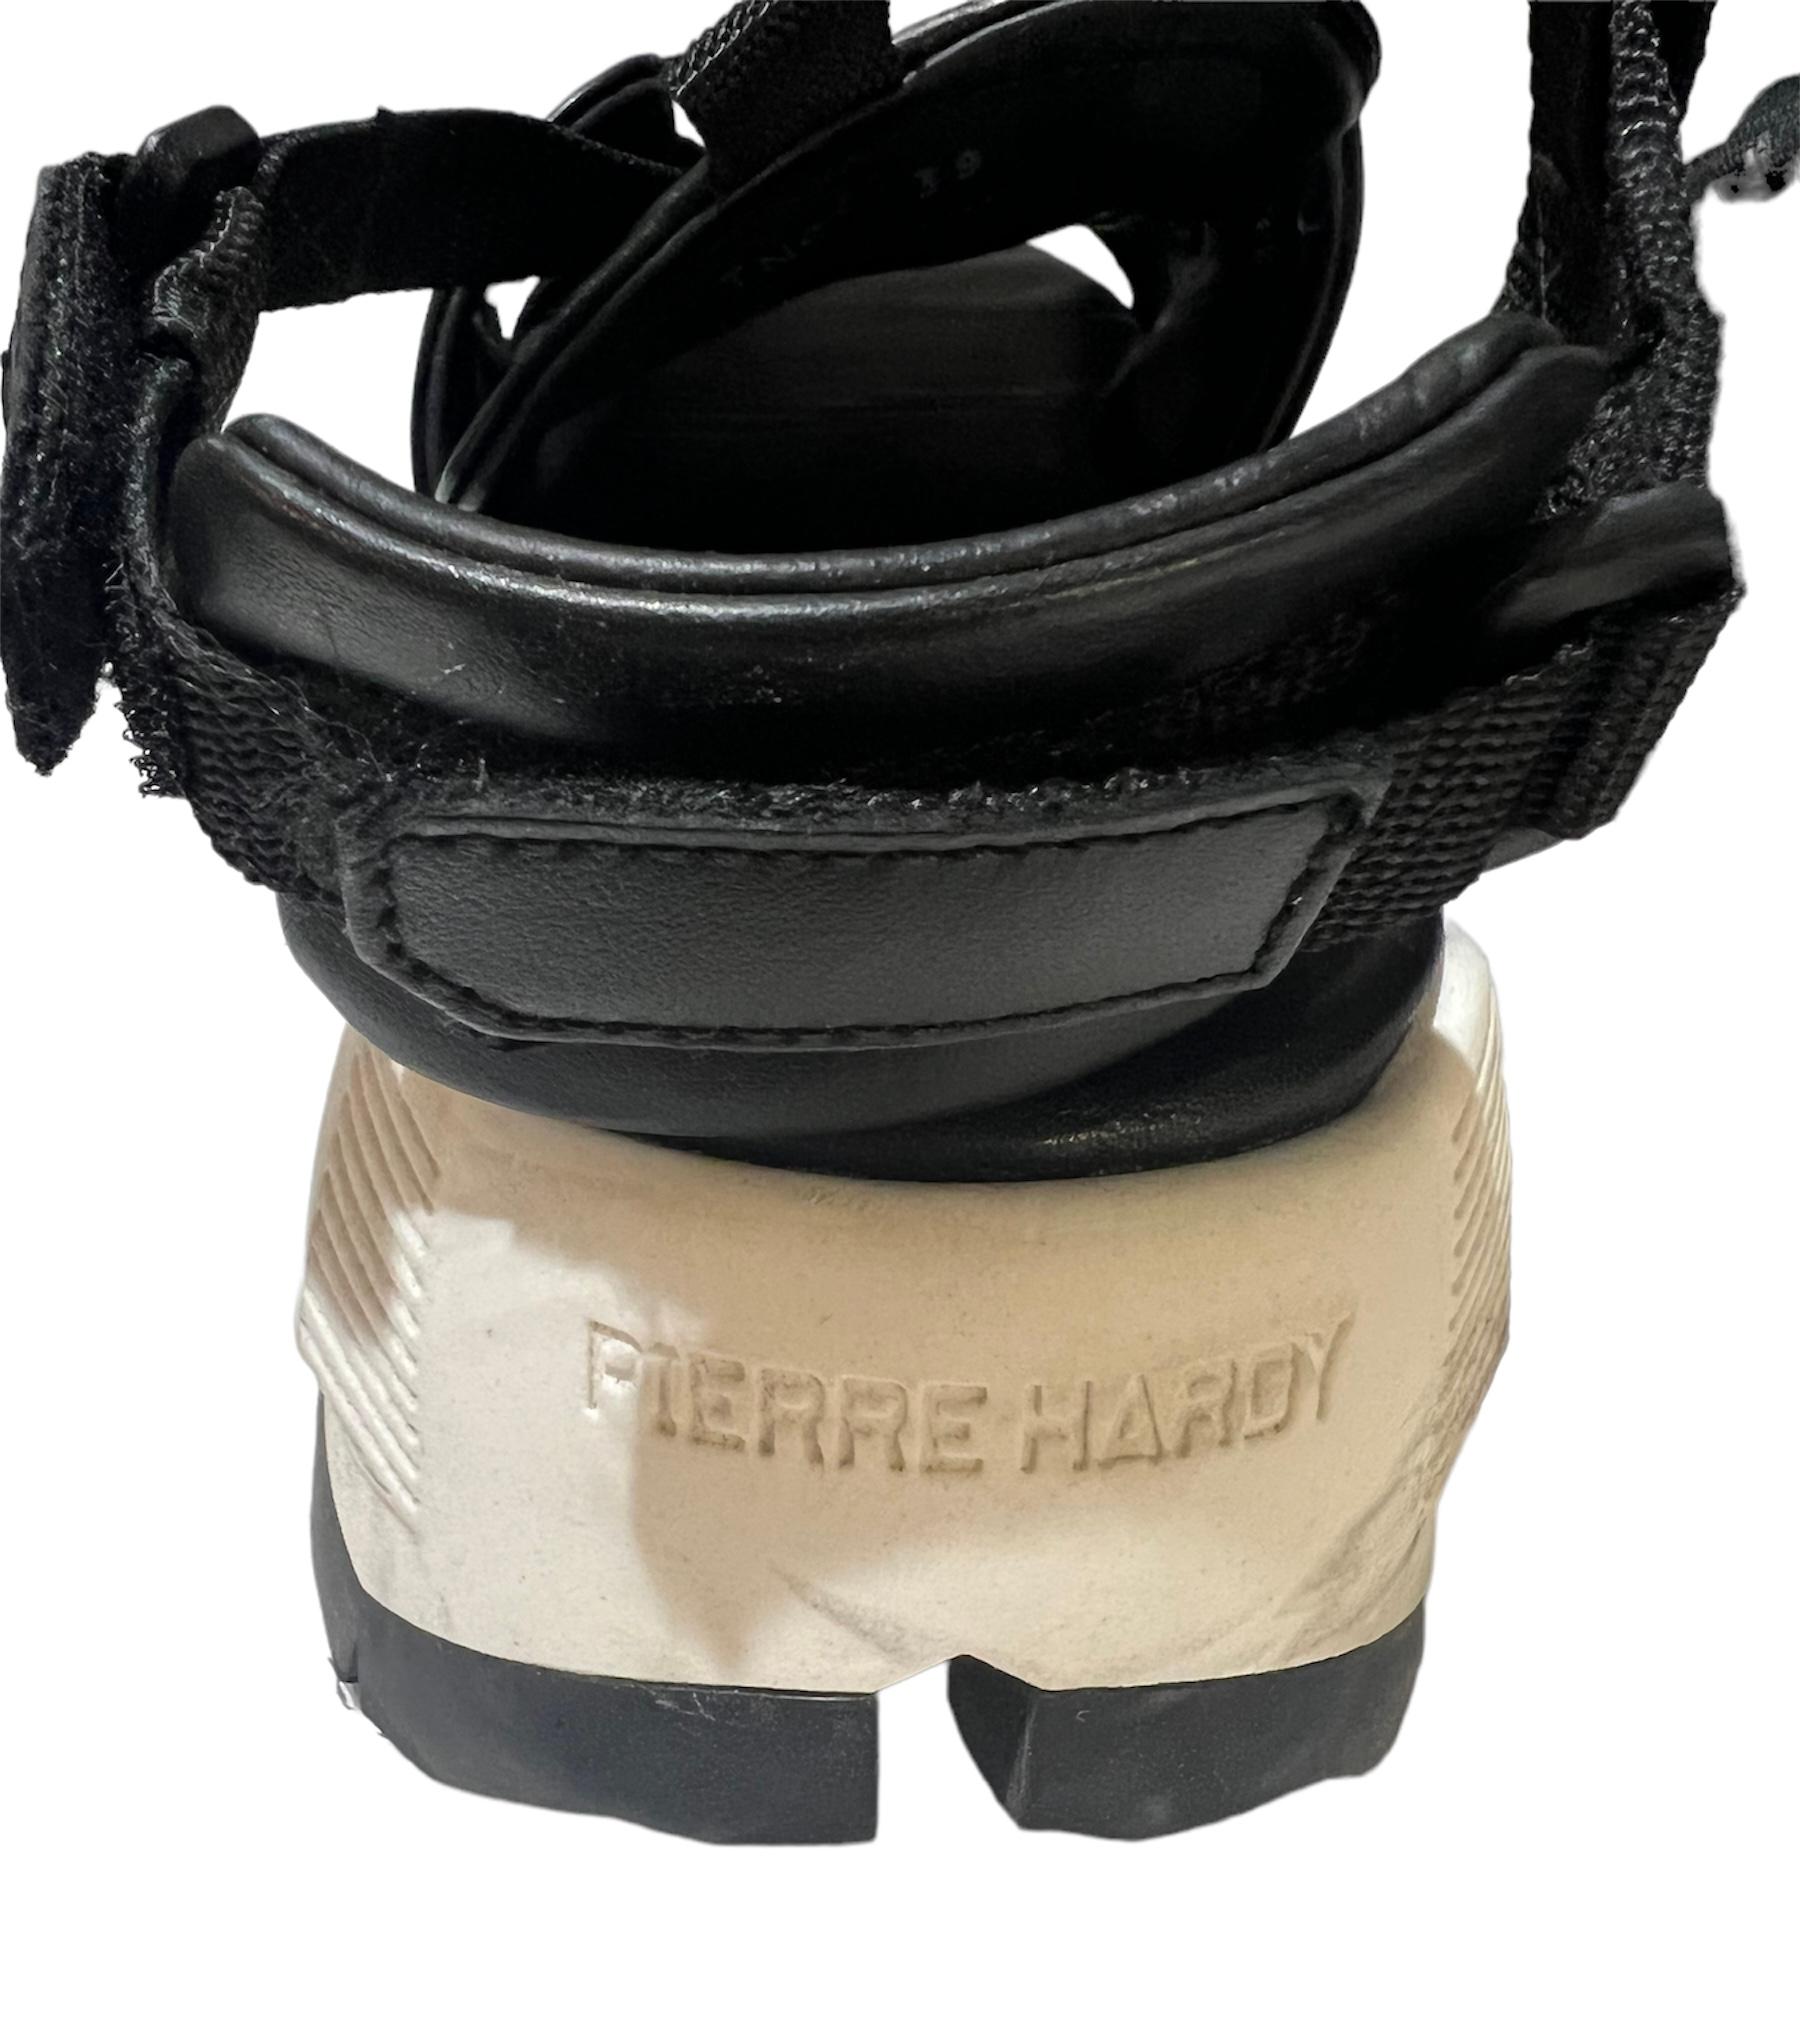 Pierre Hardy Black and White Sandals Shoes, Size 39 For Sale 2